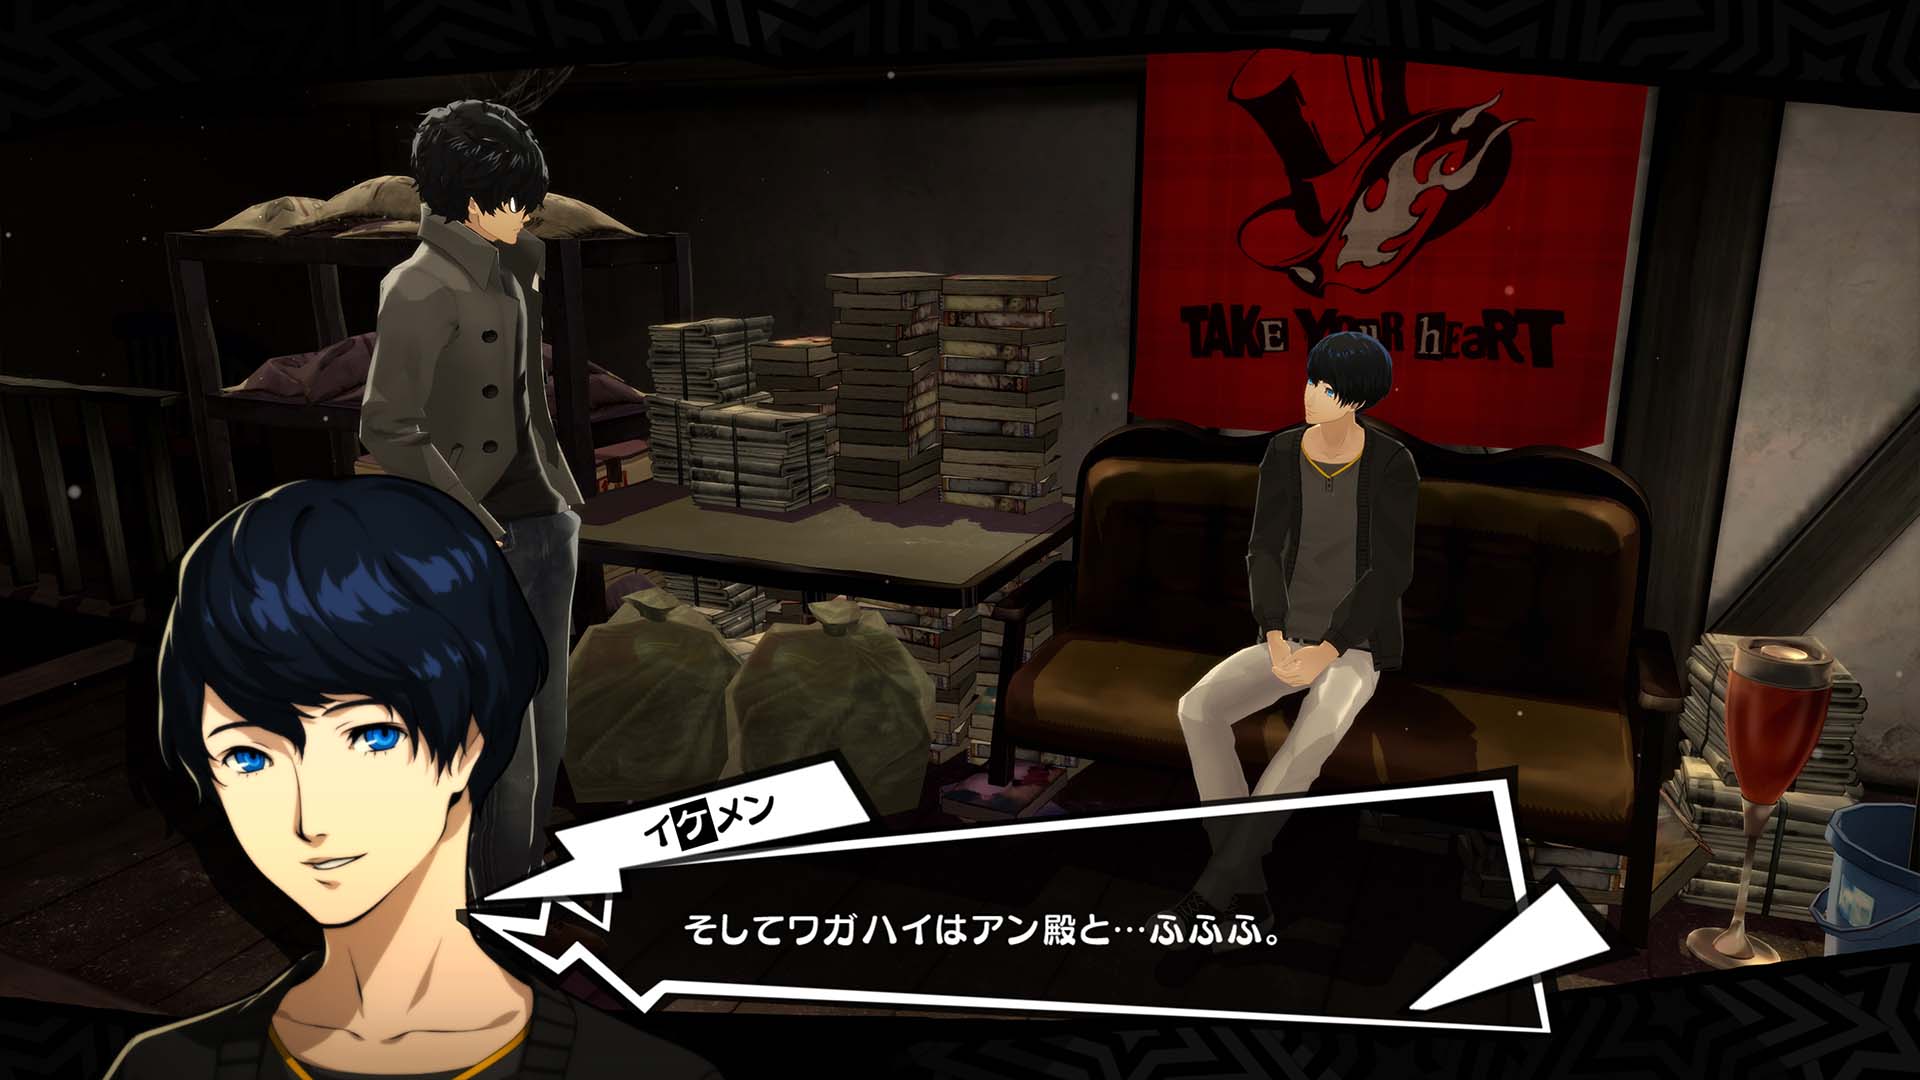 Persona 5 The Royal Revealed, Releasing for PS4 in Japan on October 31,  2019, Screenshots and Details - Persona Central